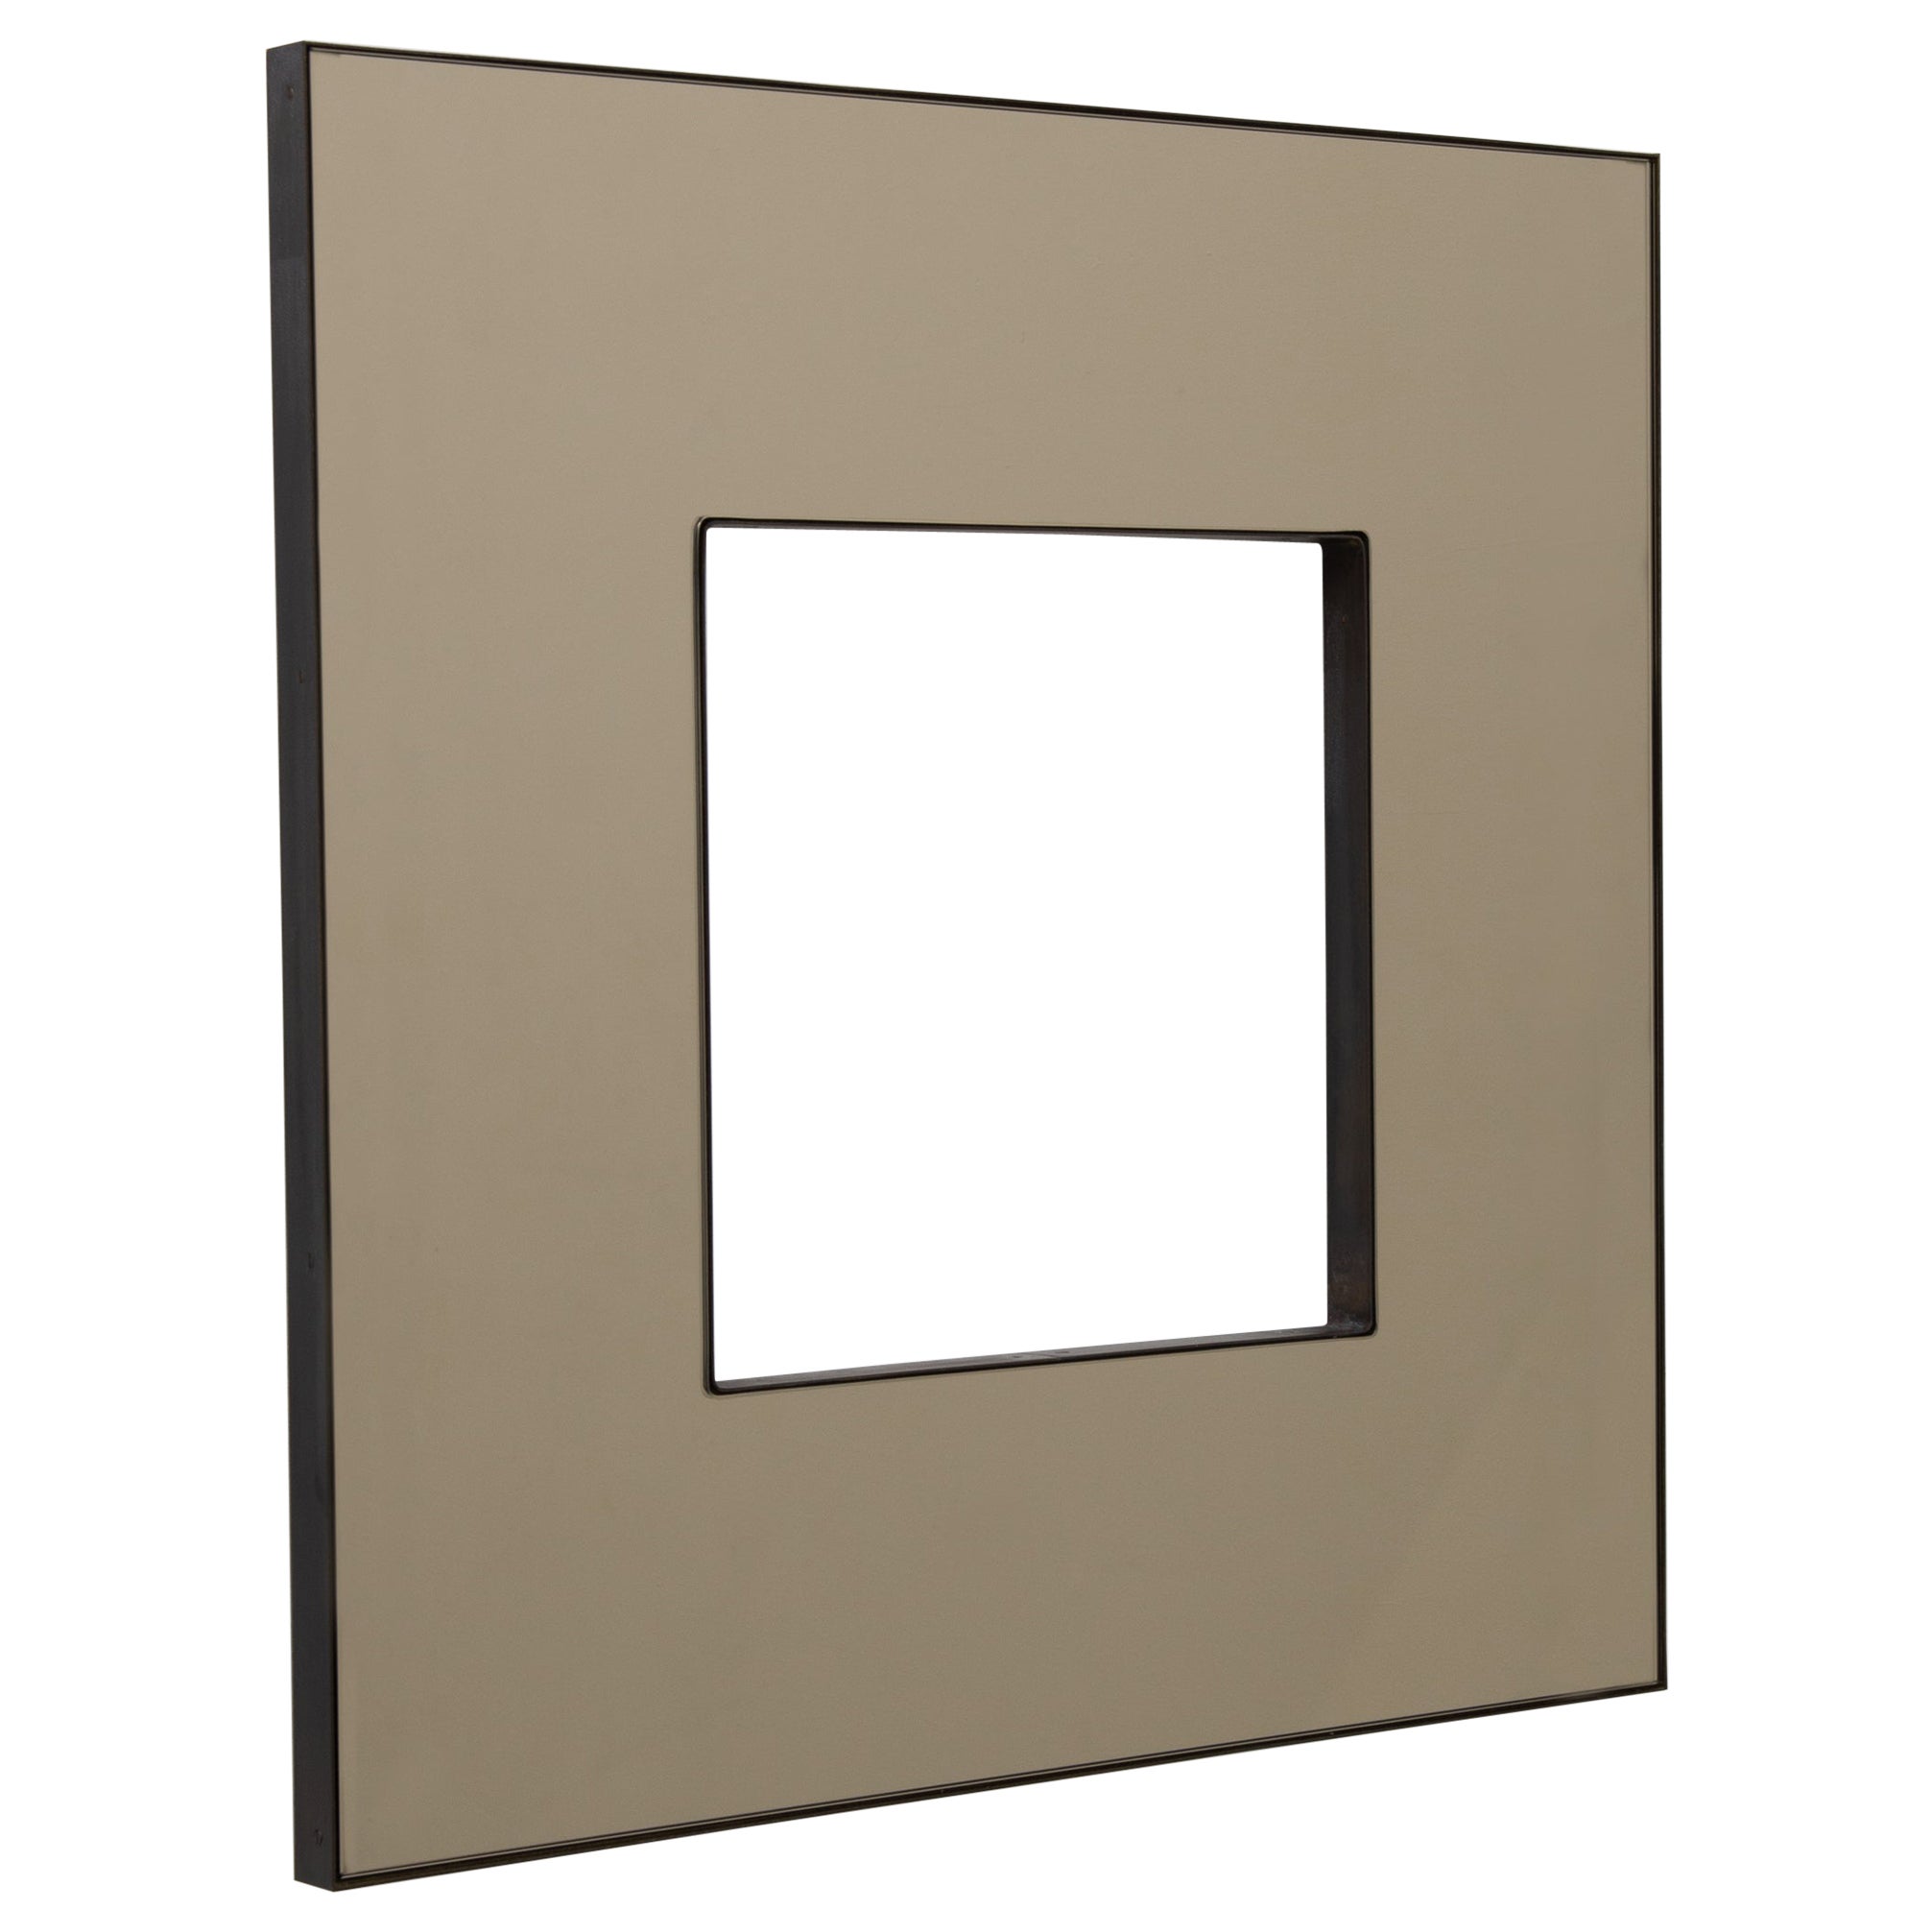 Donut Square Bronze Tinted Back Illuminated Contemporary Mirror, Large For Sale